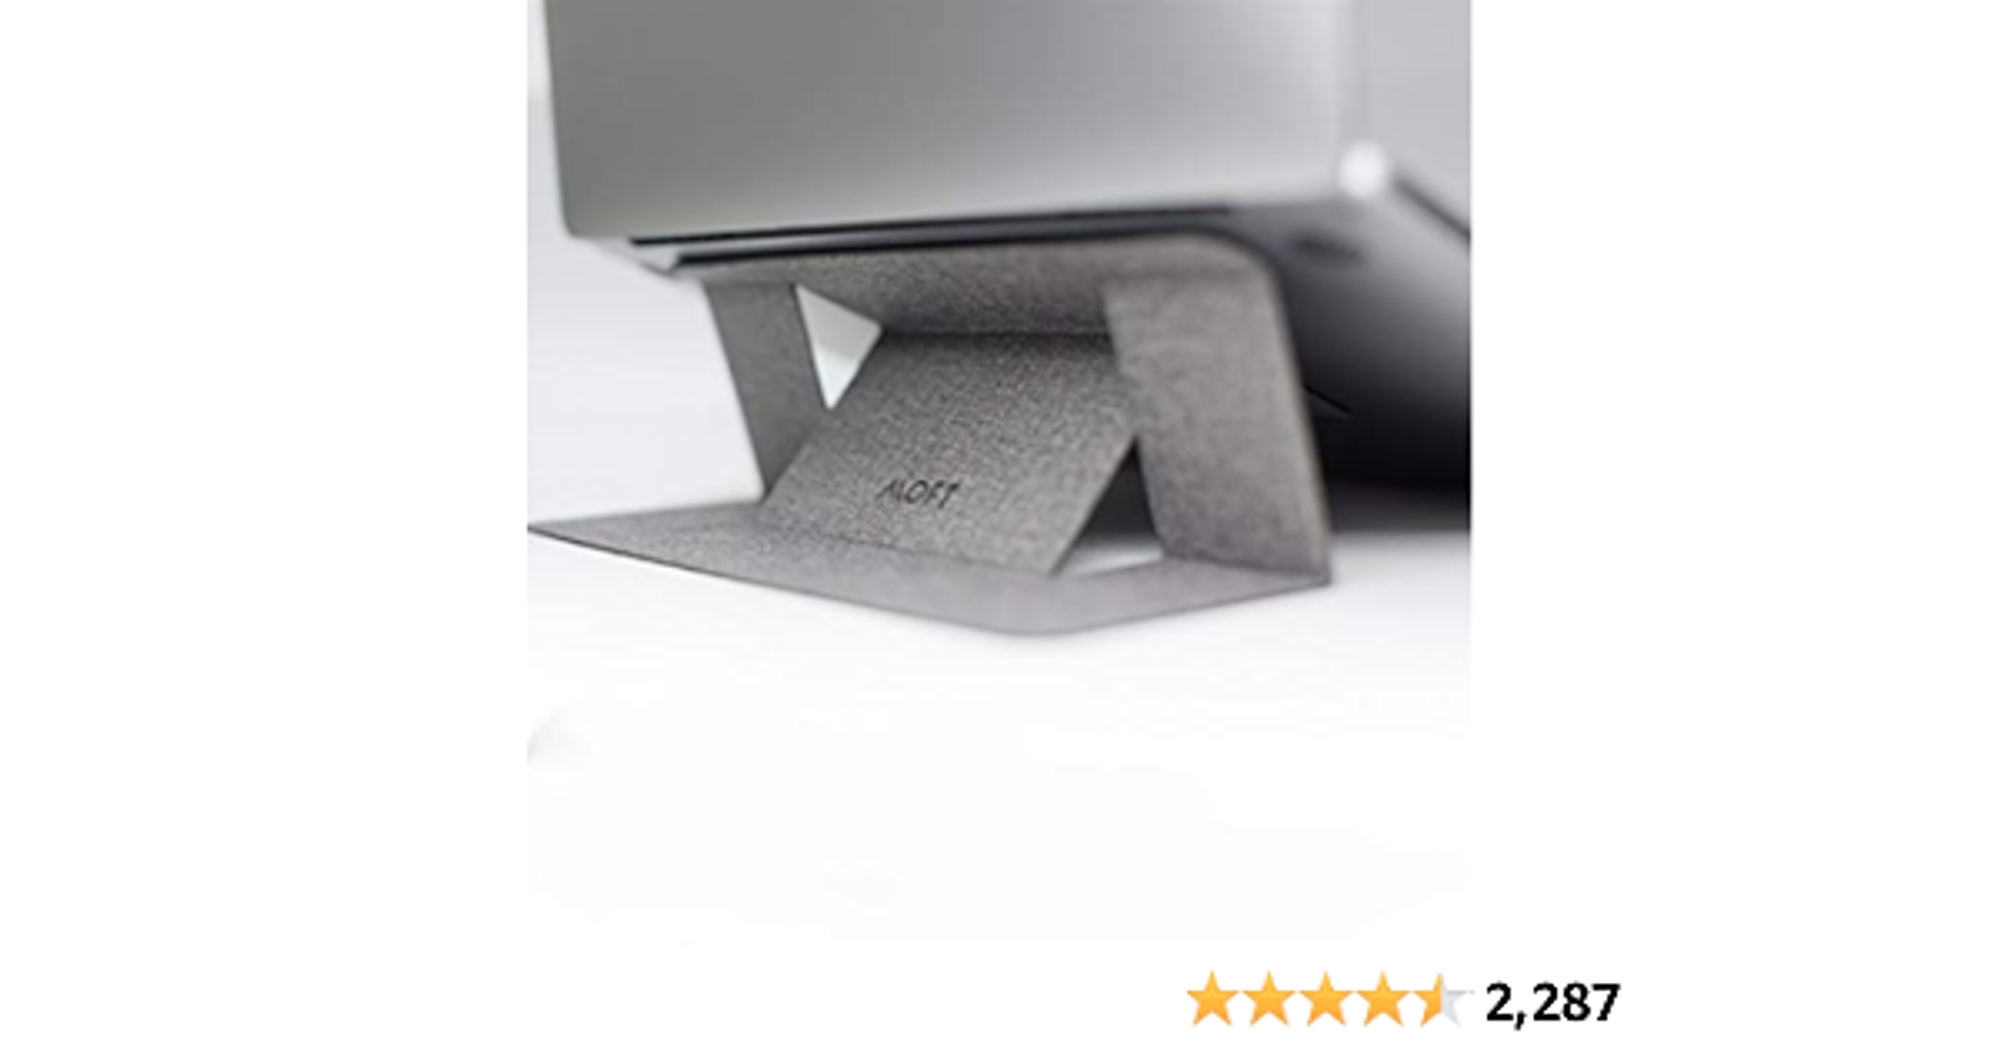 MOFT Laptop Stand, Invisible Lightweight Laptop Computer Stand, Compatible with MacBook, Air, Pro, Tablets and Laptops Up to 15.6", Patented, Jean Grey